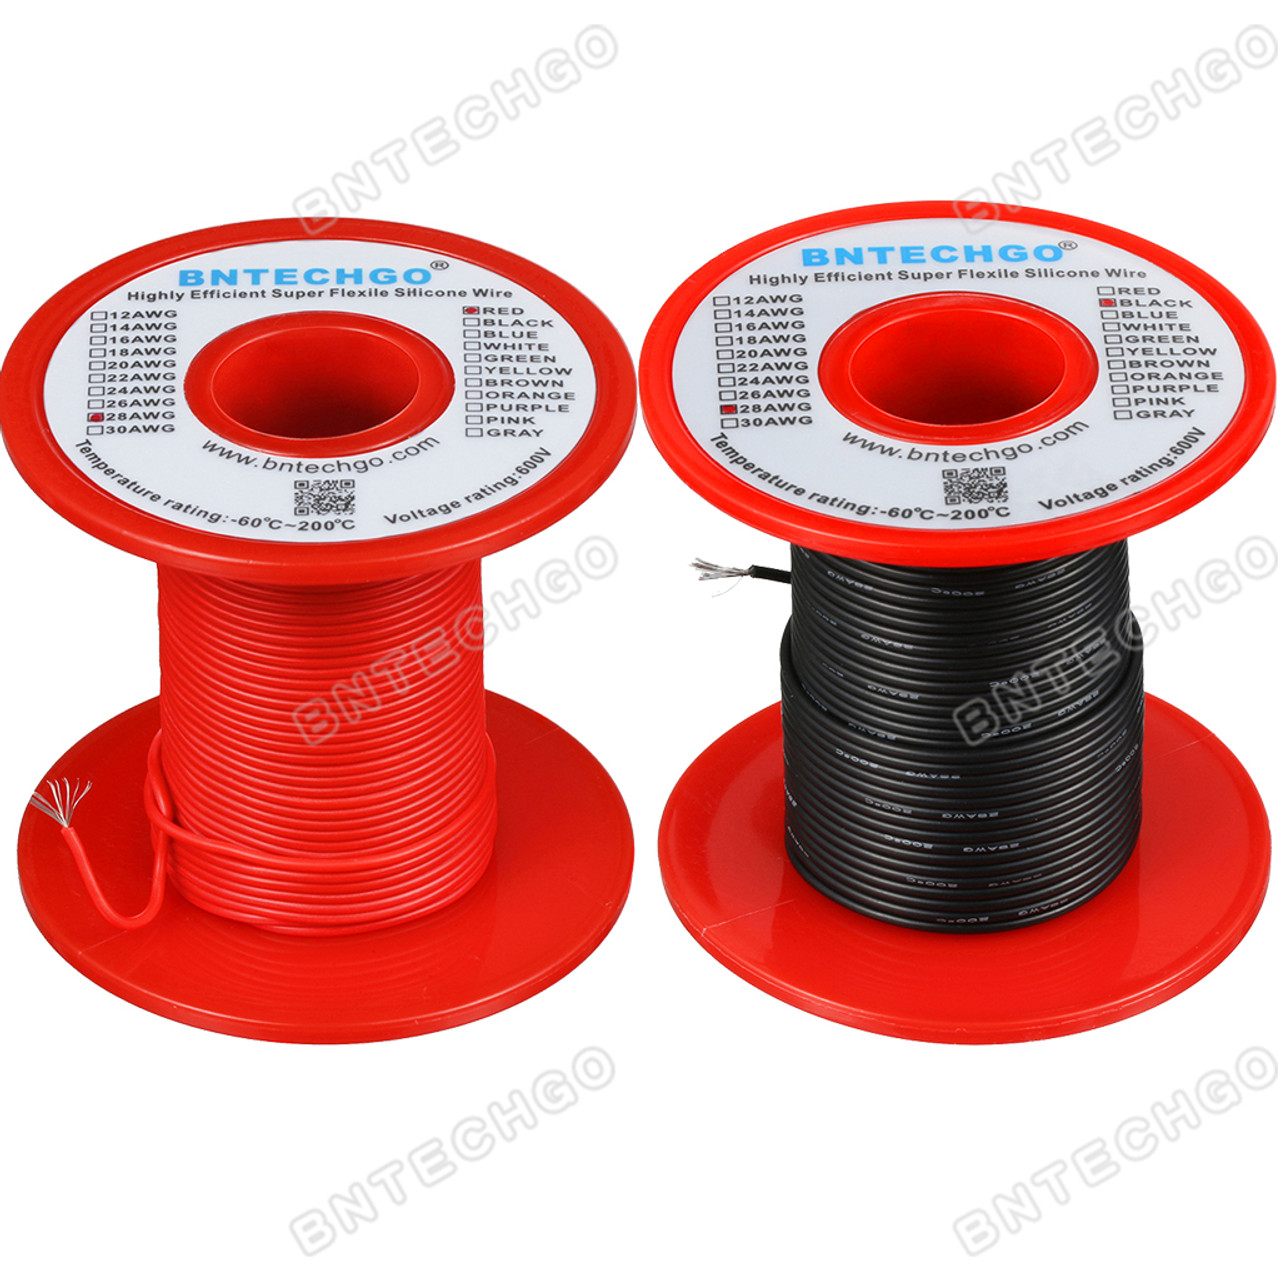 BNTECHGO 28 AWG Silicone Wire Spool 500 feet Ultra Flexible High Temp 200  deg C 600V 28 Gauge Silicone Wire 16 Strands of Tinned Copper Wire 250 ft